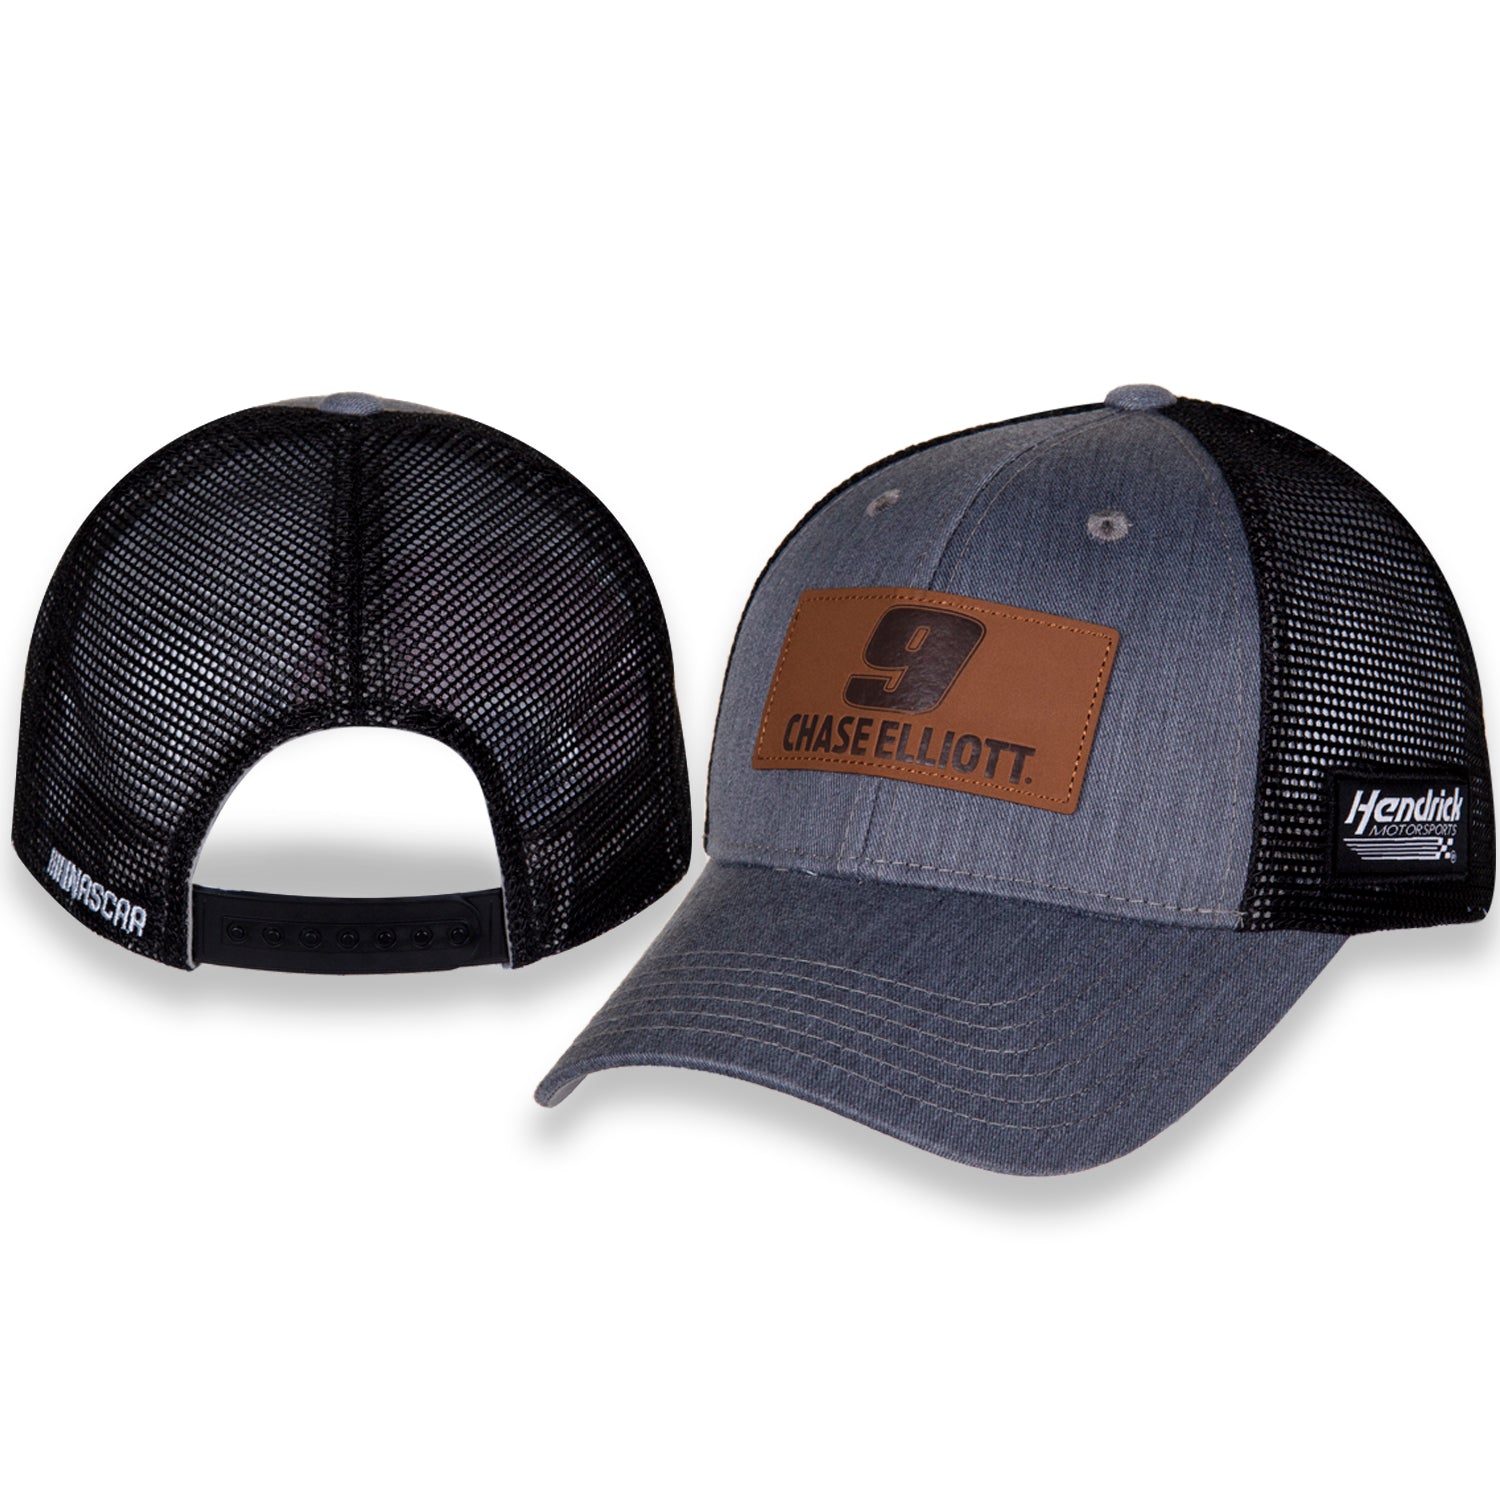 CHASE ELLIOTT LEATHER PATCH HAT